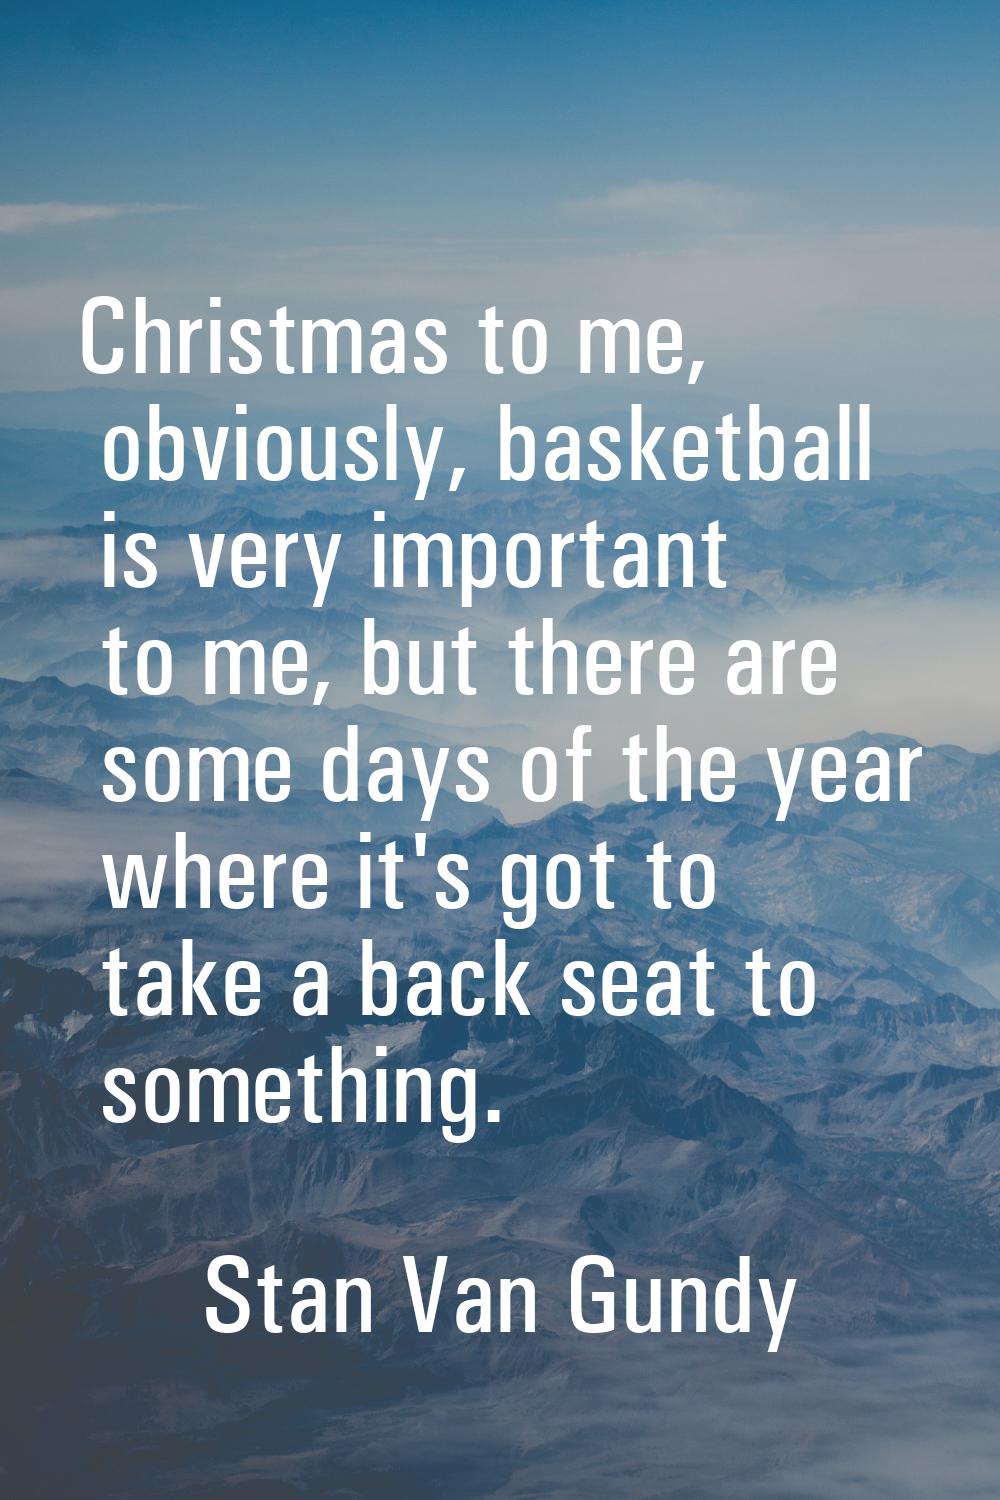 Christmas to me, obviously, basketball is very important to me, but there are some days of the year